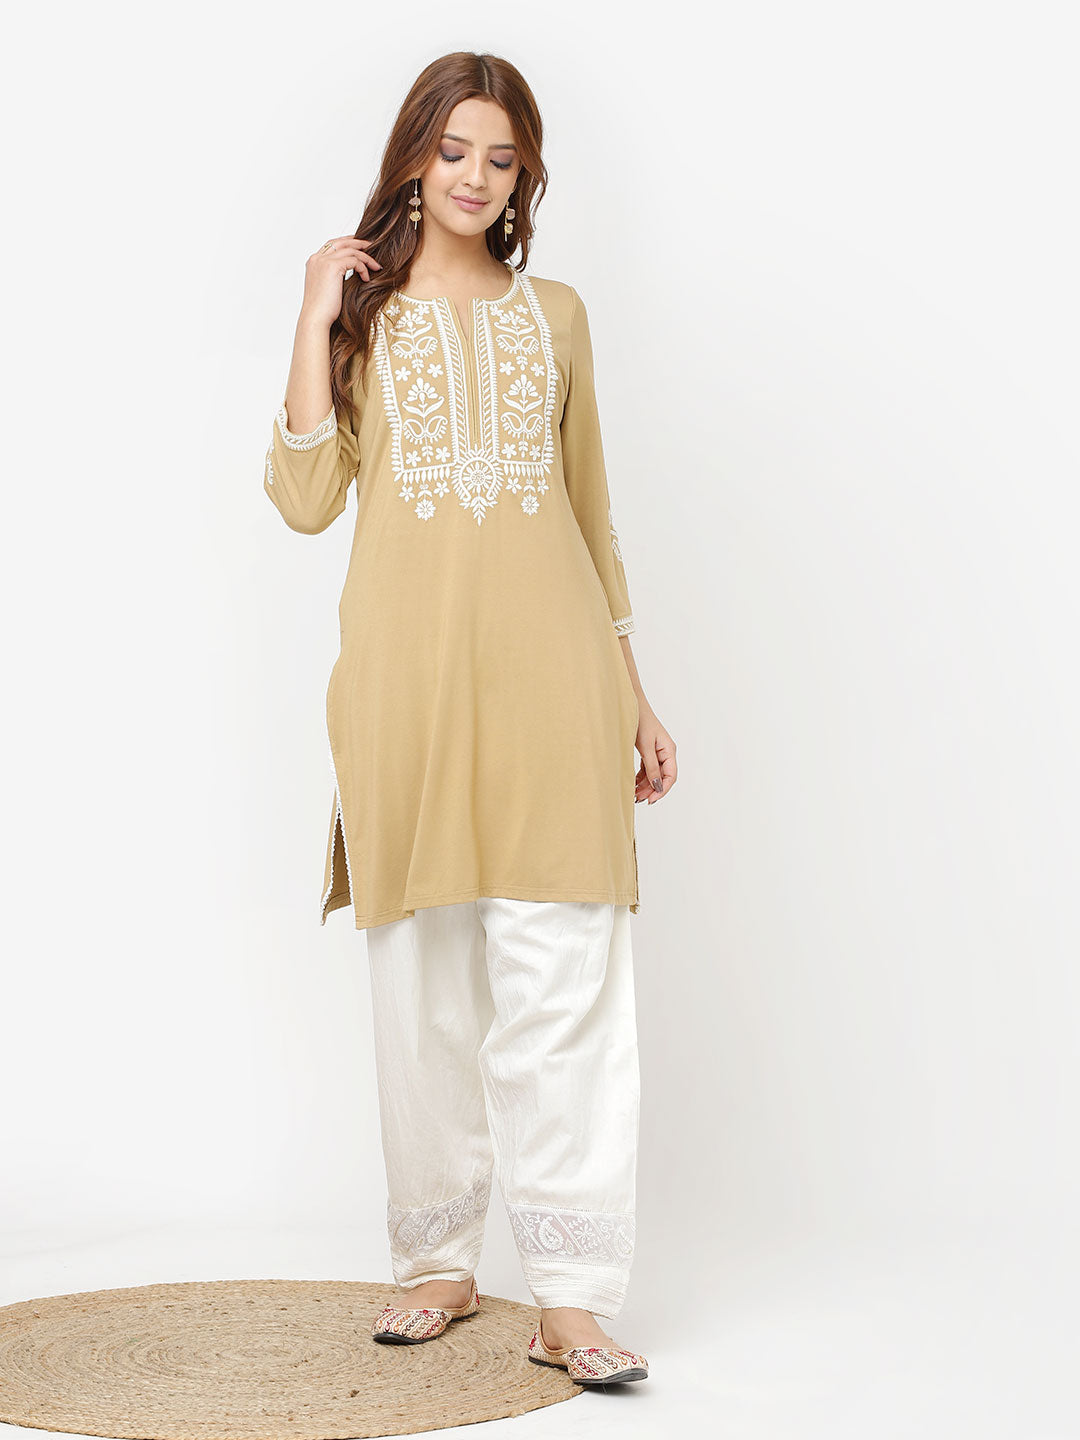 Buy Lative Tapta Silk Floor Touch Gown | Dress with Long Net Shrug for  Women & Girls at Amazon.in